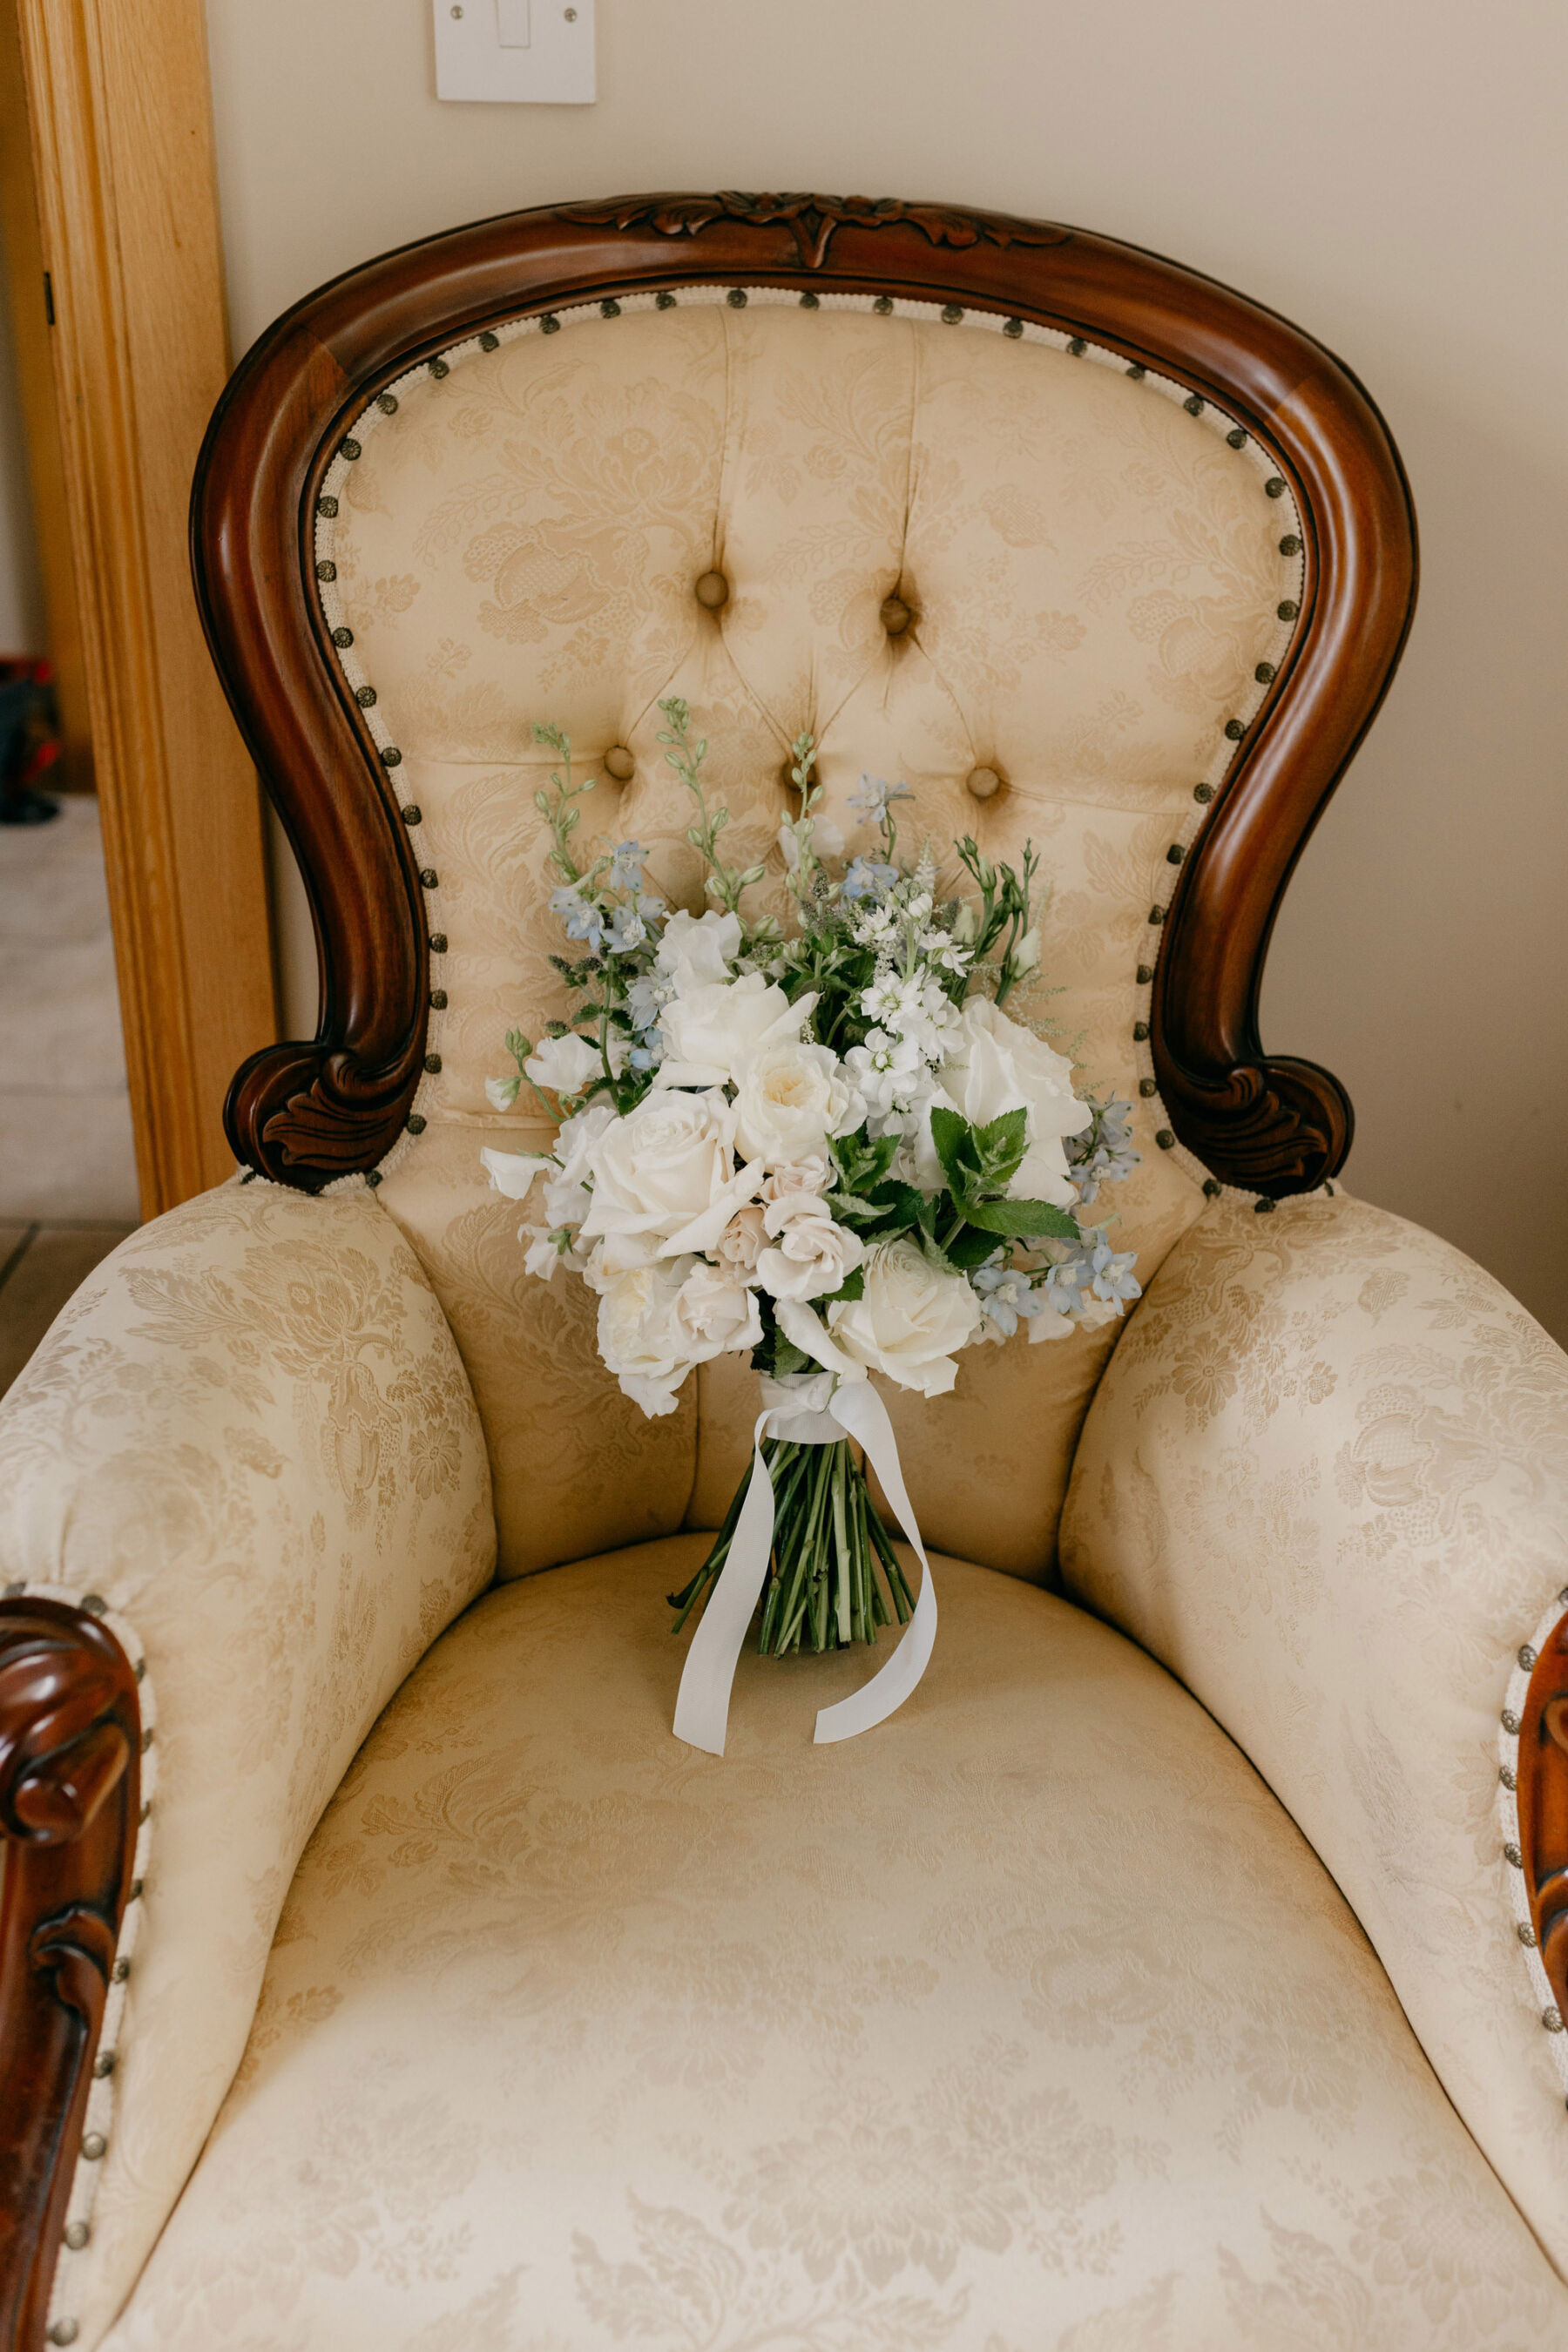 Elegant wedding bouquet of all white flowers positioned on a chair.